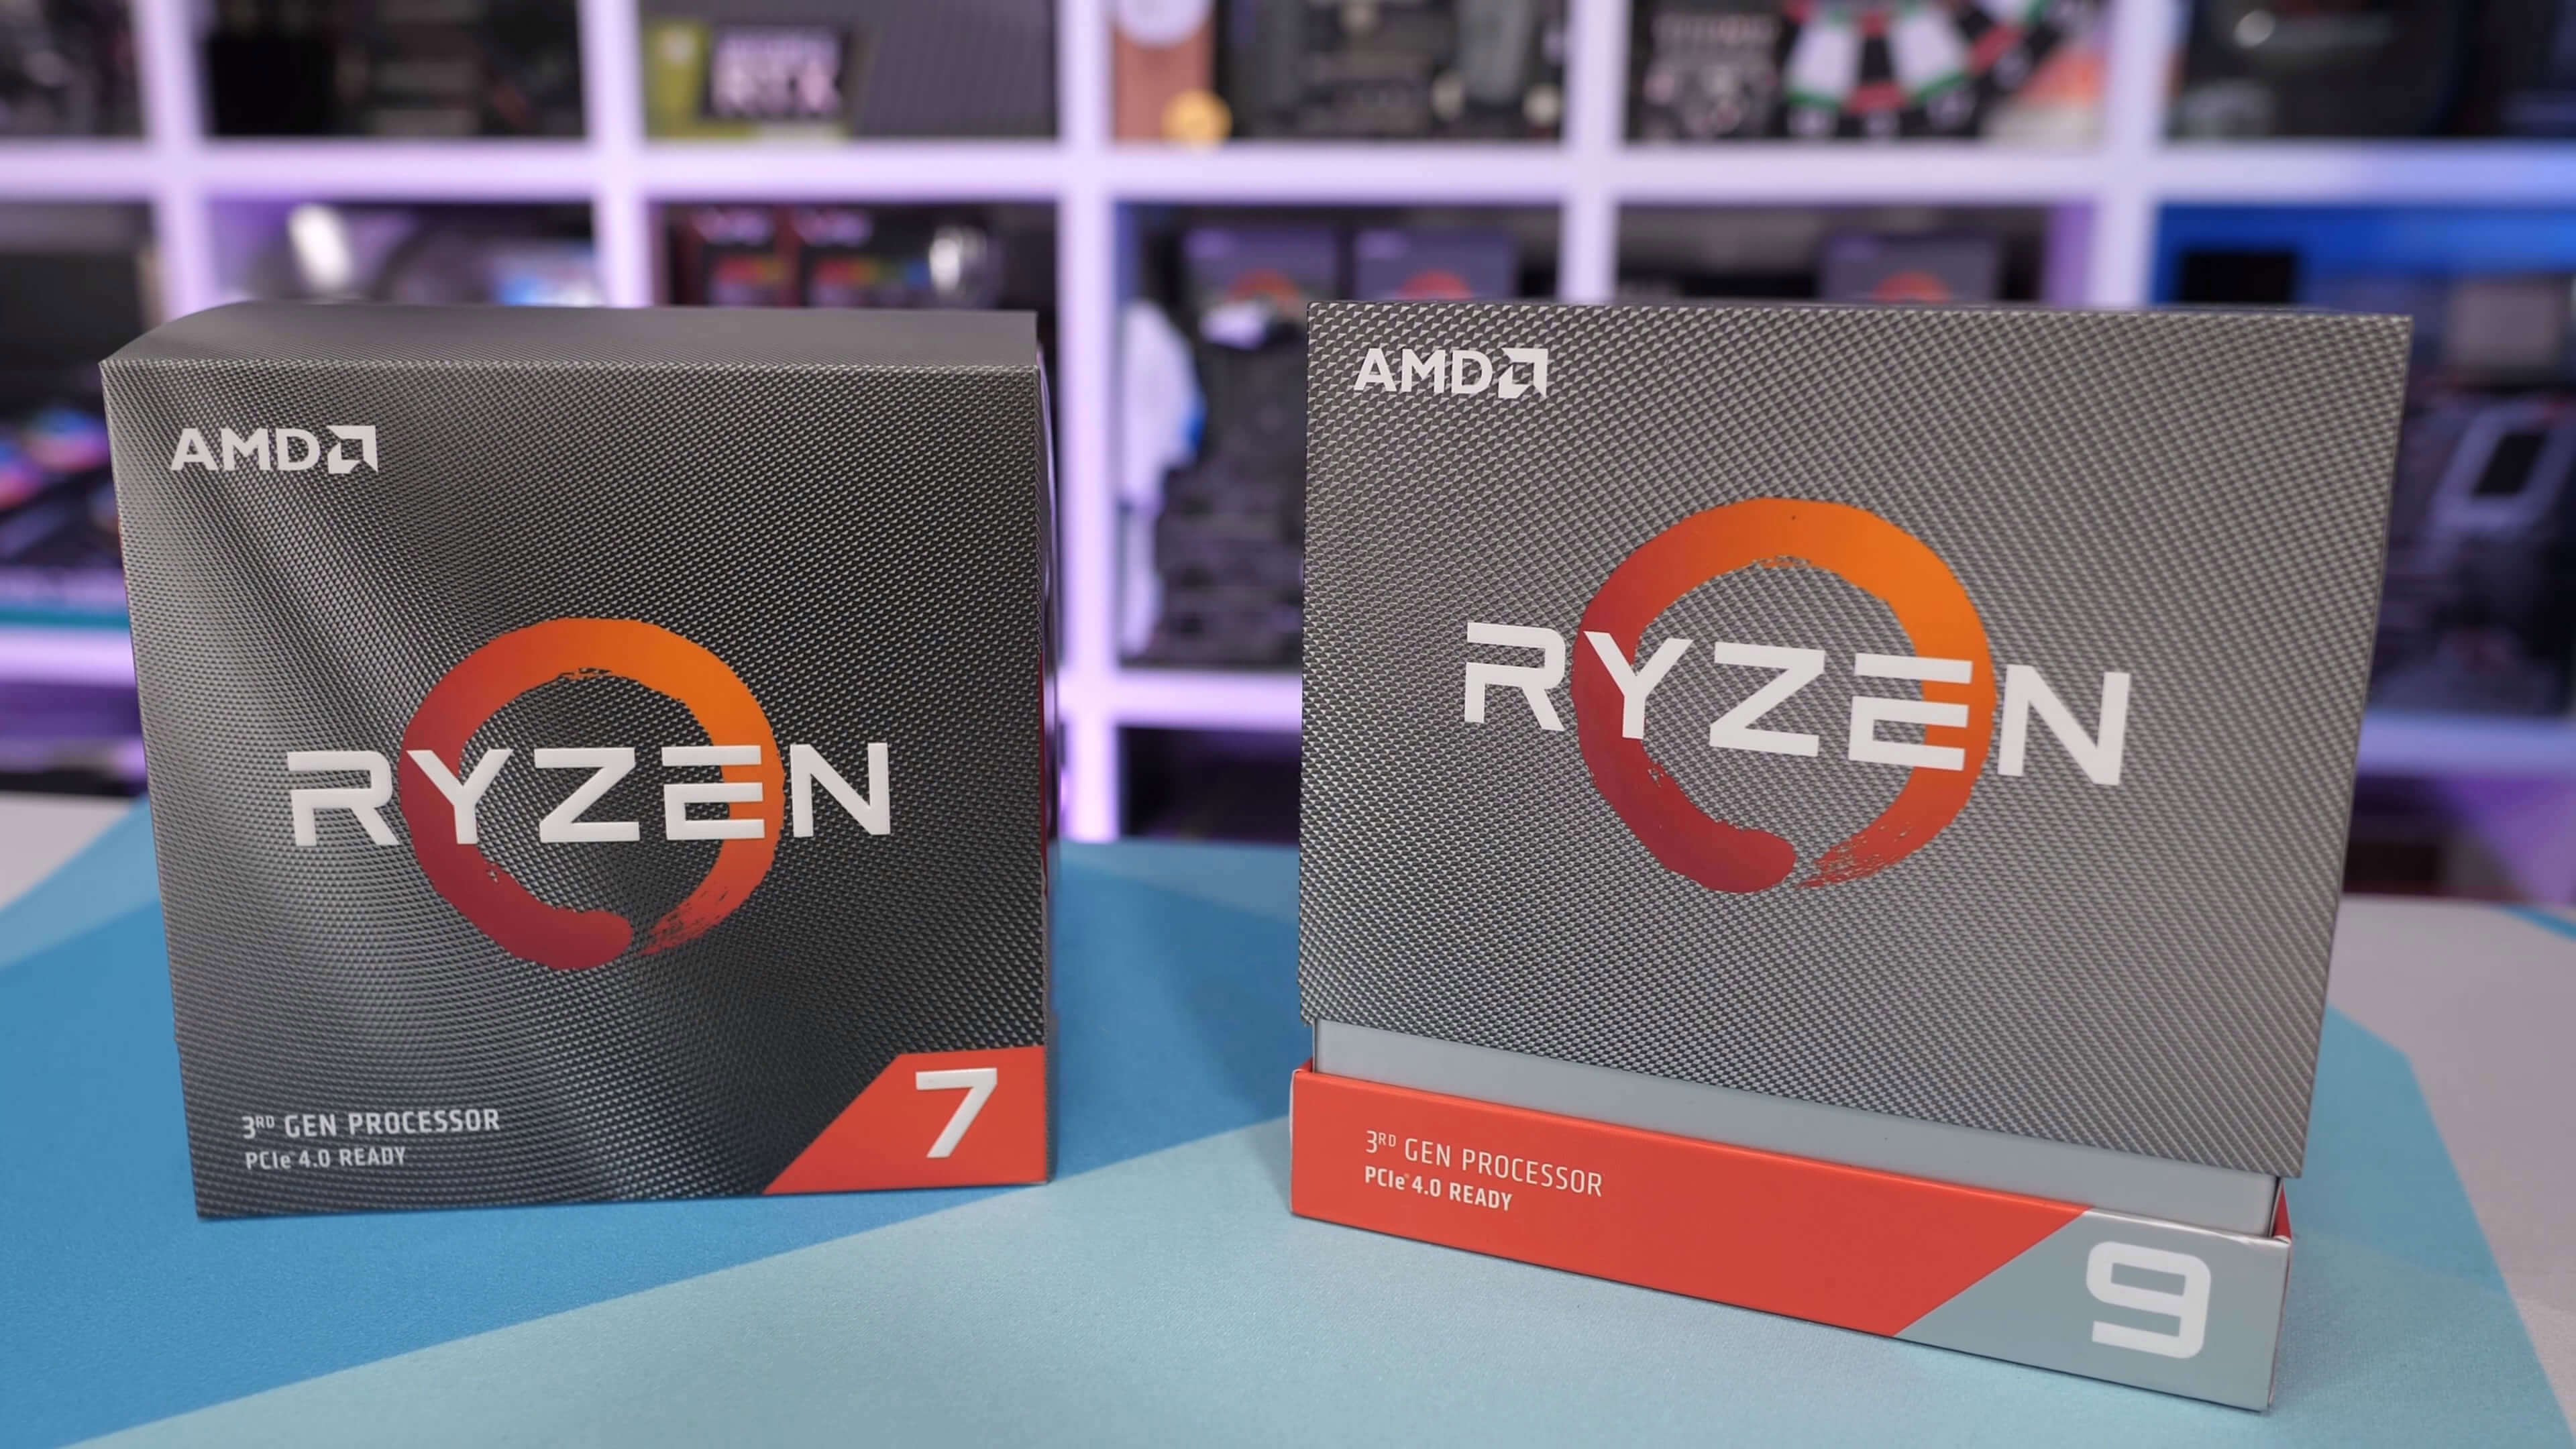 Ryzen 9 3900X shortages see chips appear on eBay with inflated prices